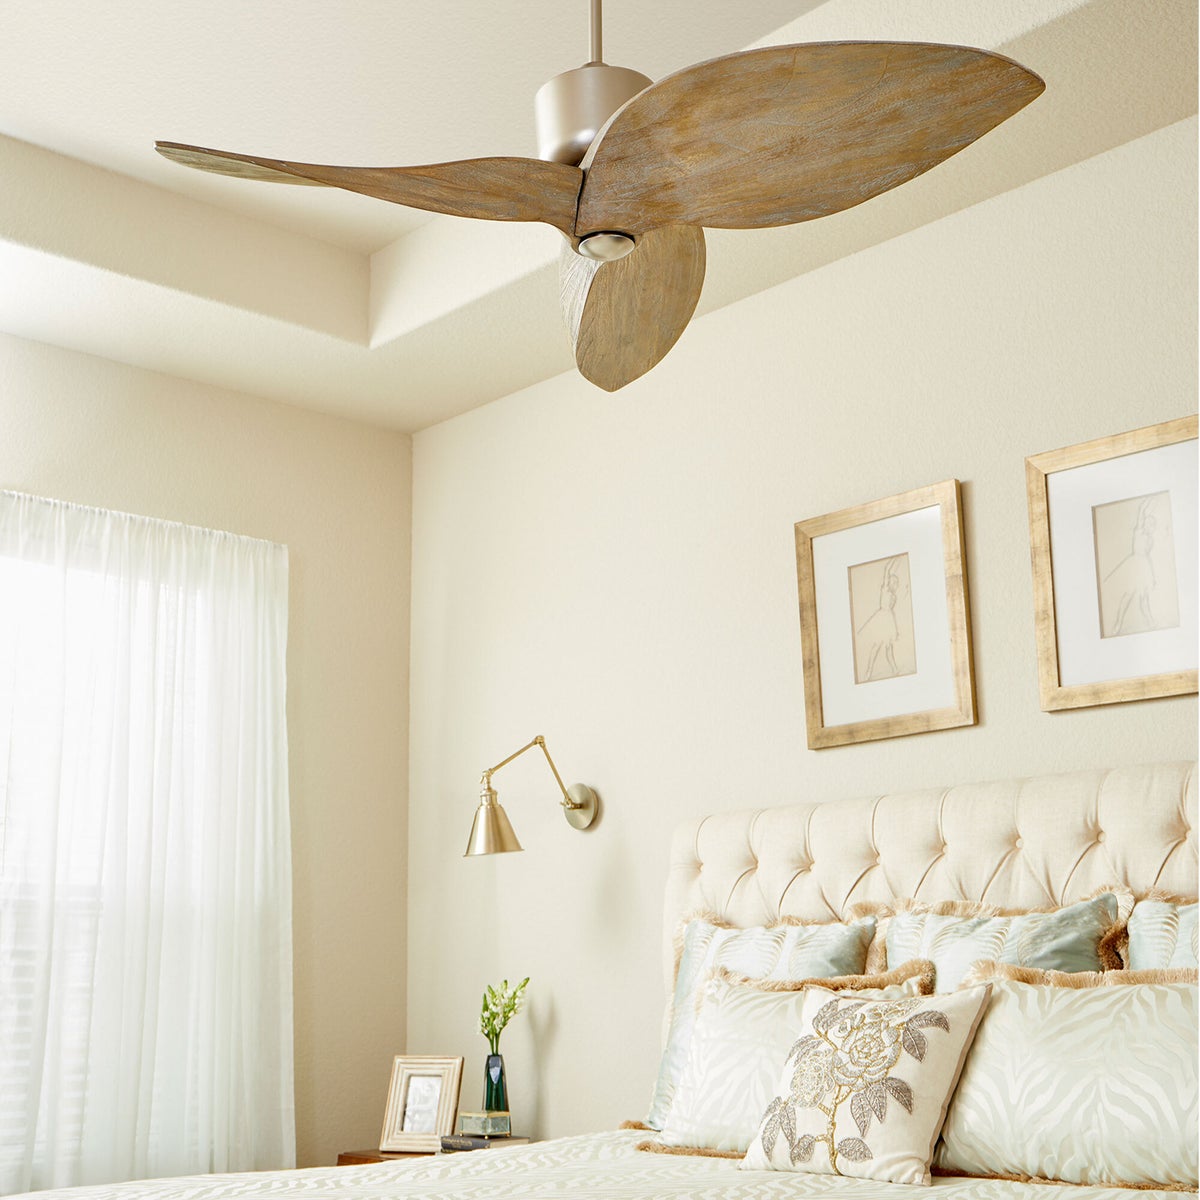 Contemporary Ceiling Fan in a bedroom with wooden blades, a white curtain, framed pictures, and a gold lamp on the wall.